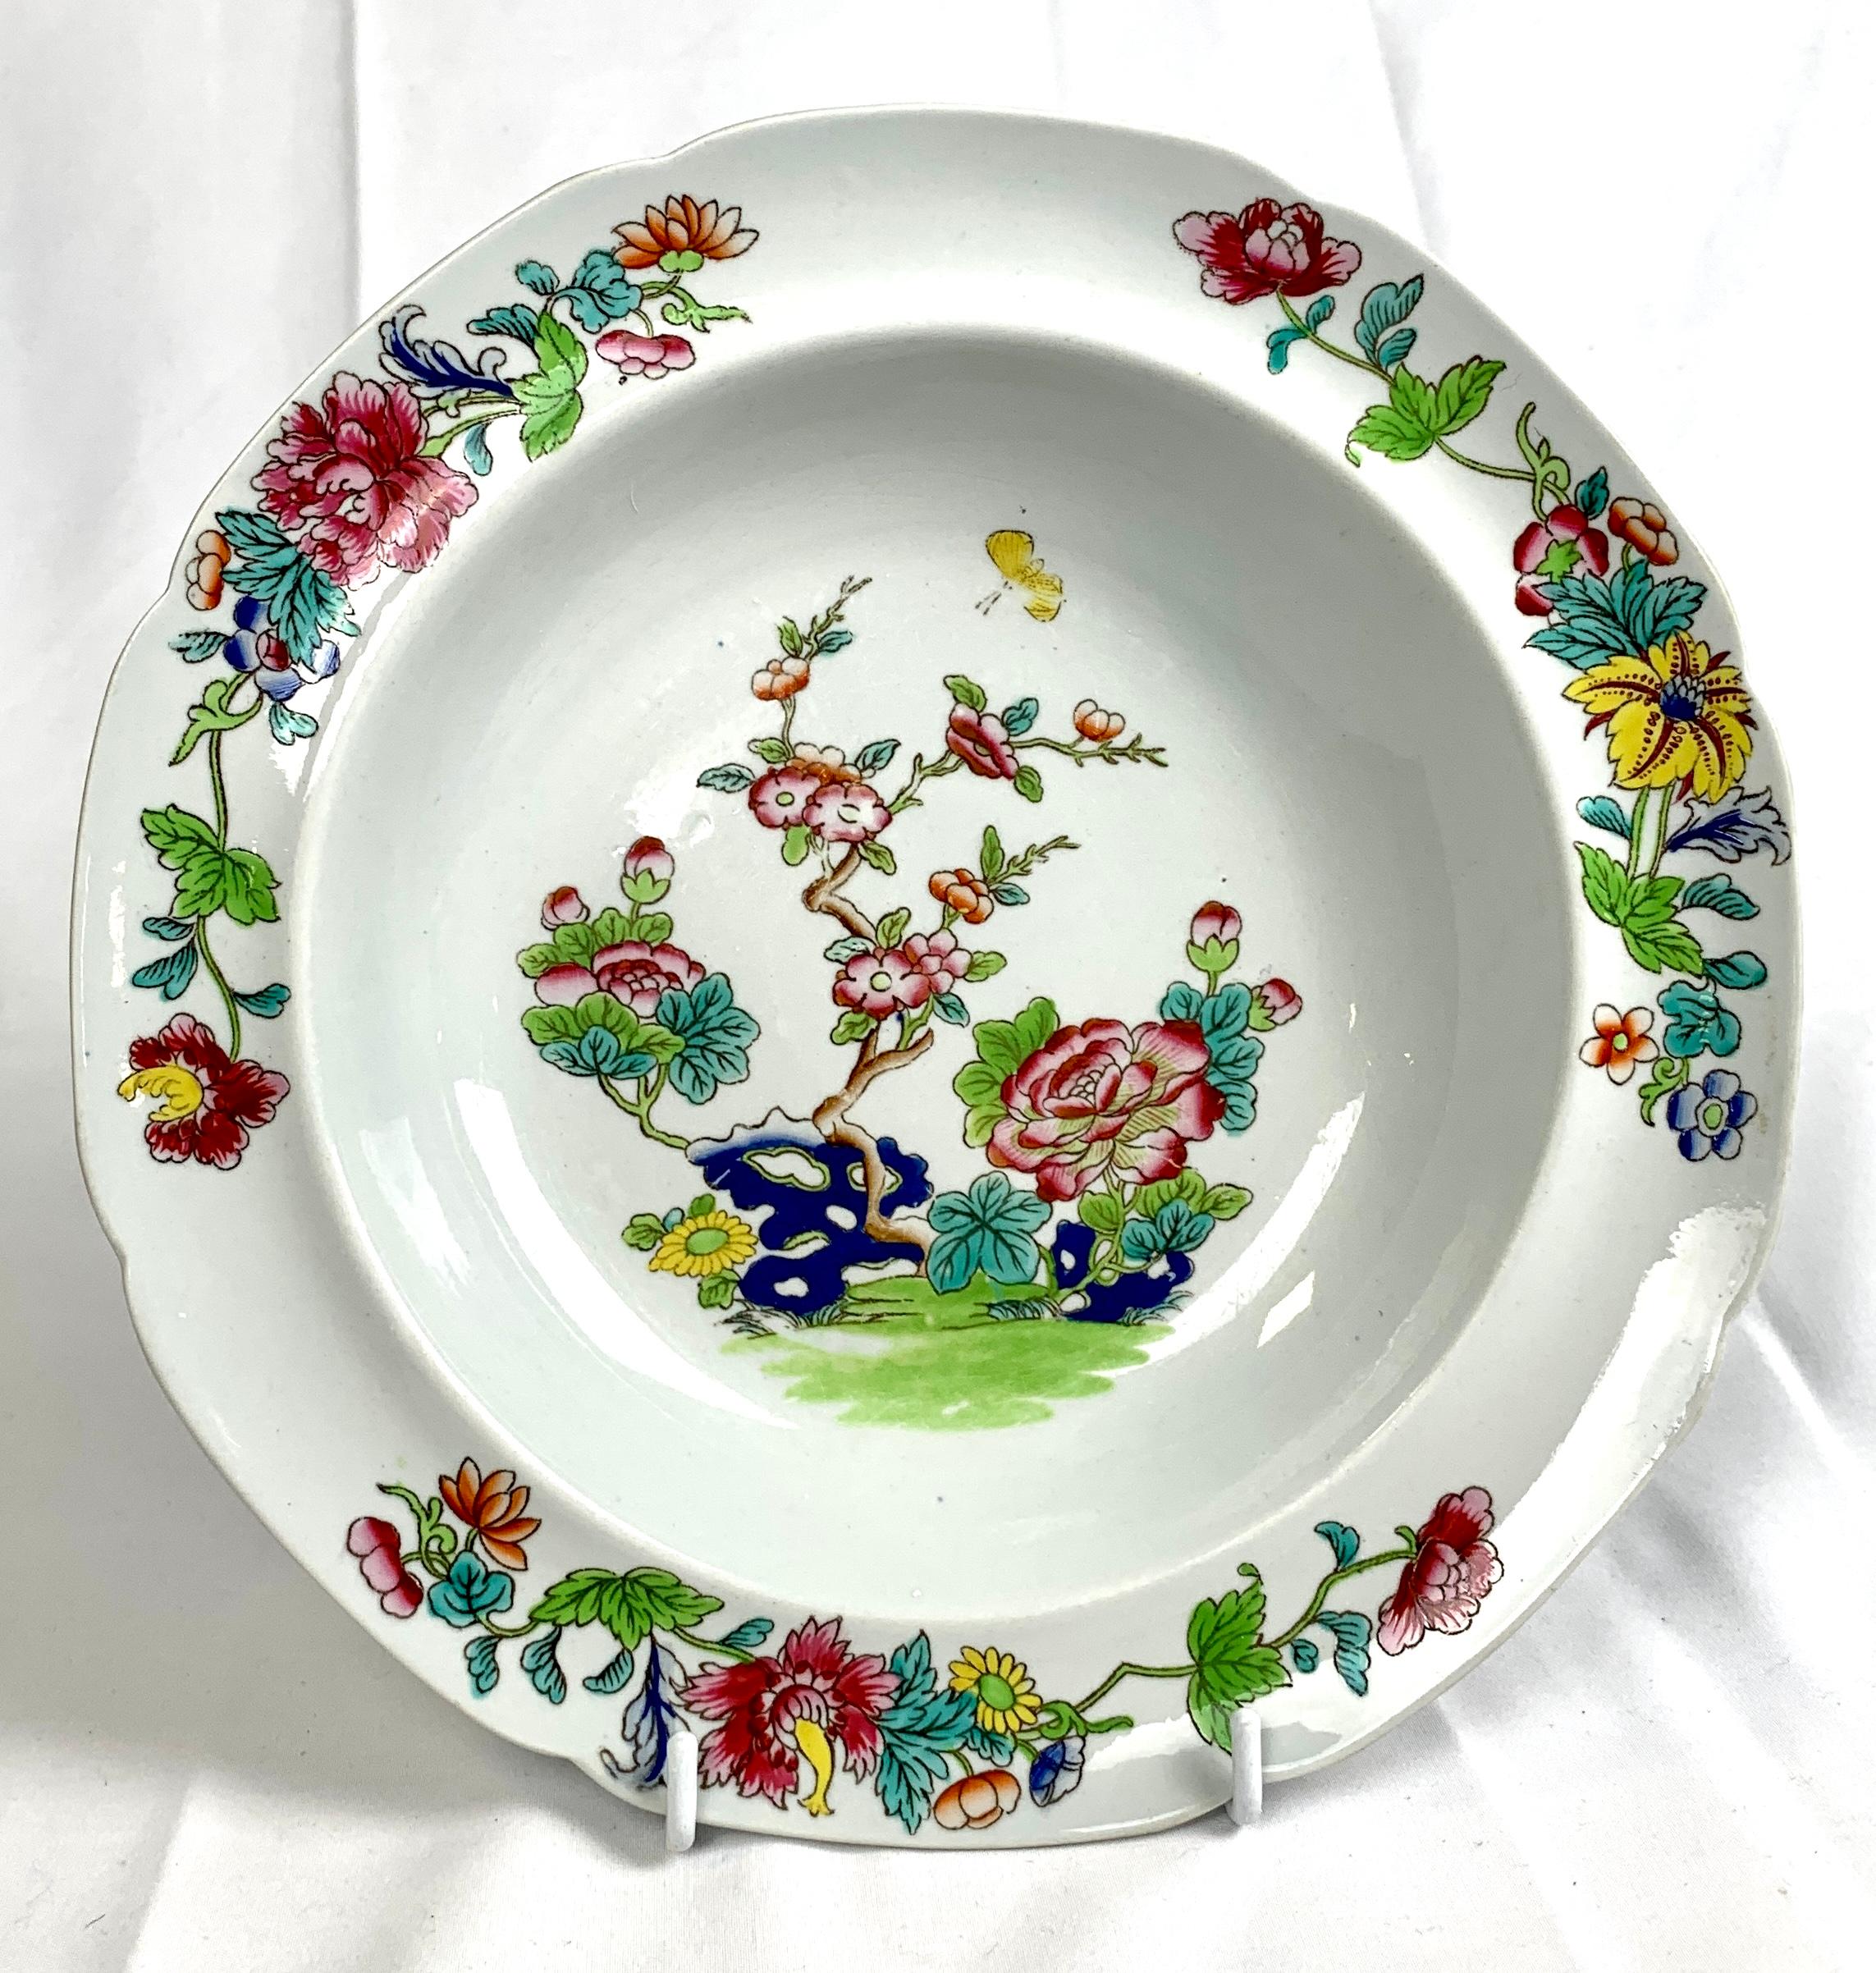 This set of six ironstone soup dishes was made in the Spode factory circa 1820.
In the center, we see a lovely garden scene with pink and purple peonies, plum blossoms, and 
a yellow chrysanthemum, all rising above cobalt-blue rockwork.
The colors